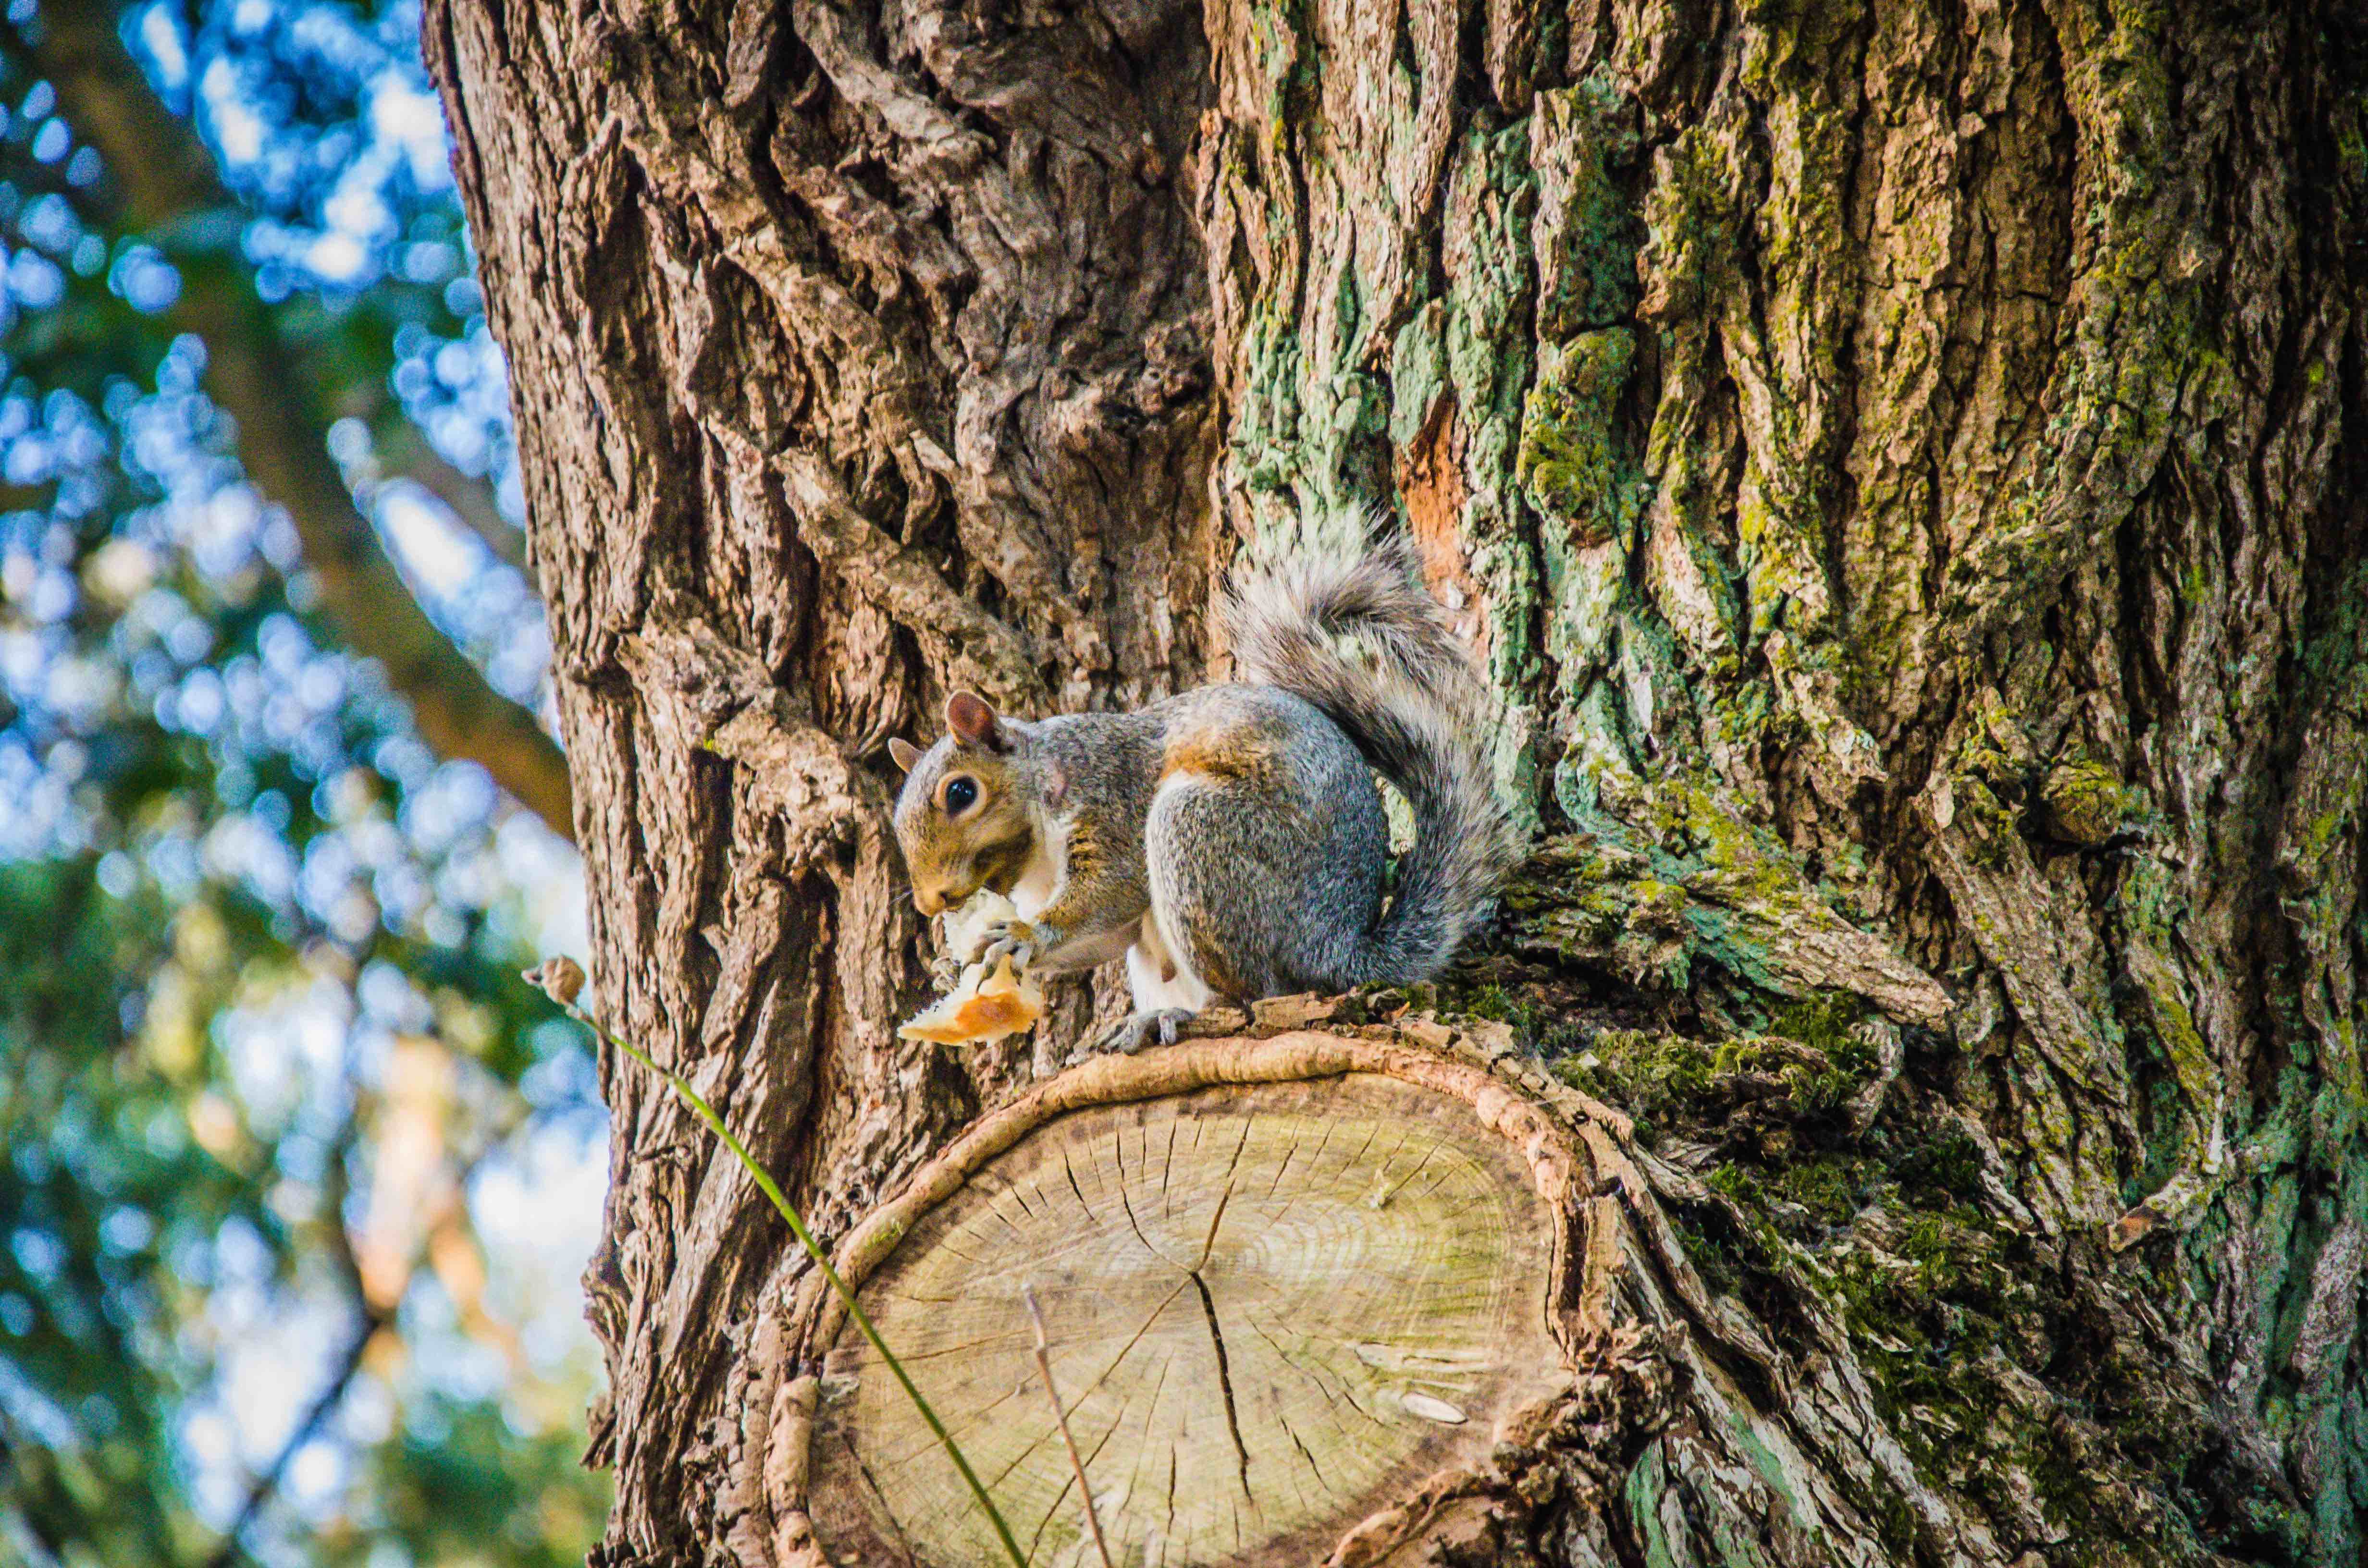 Squirrel in tree.